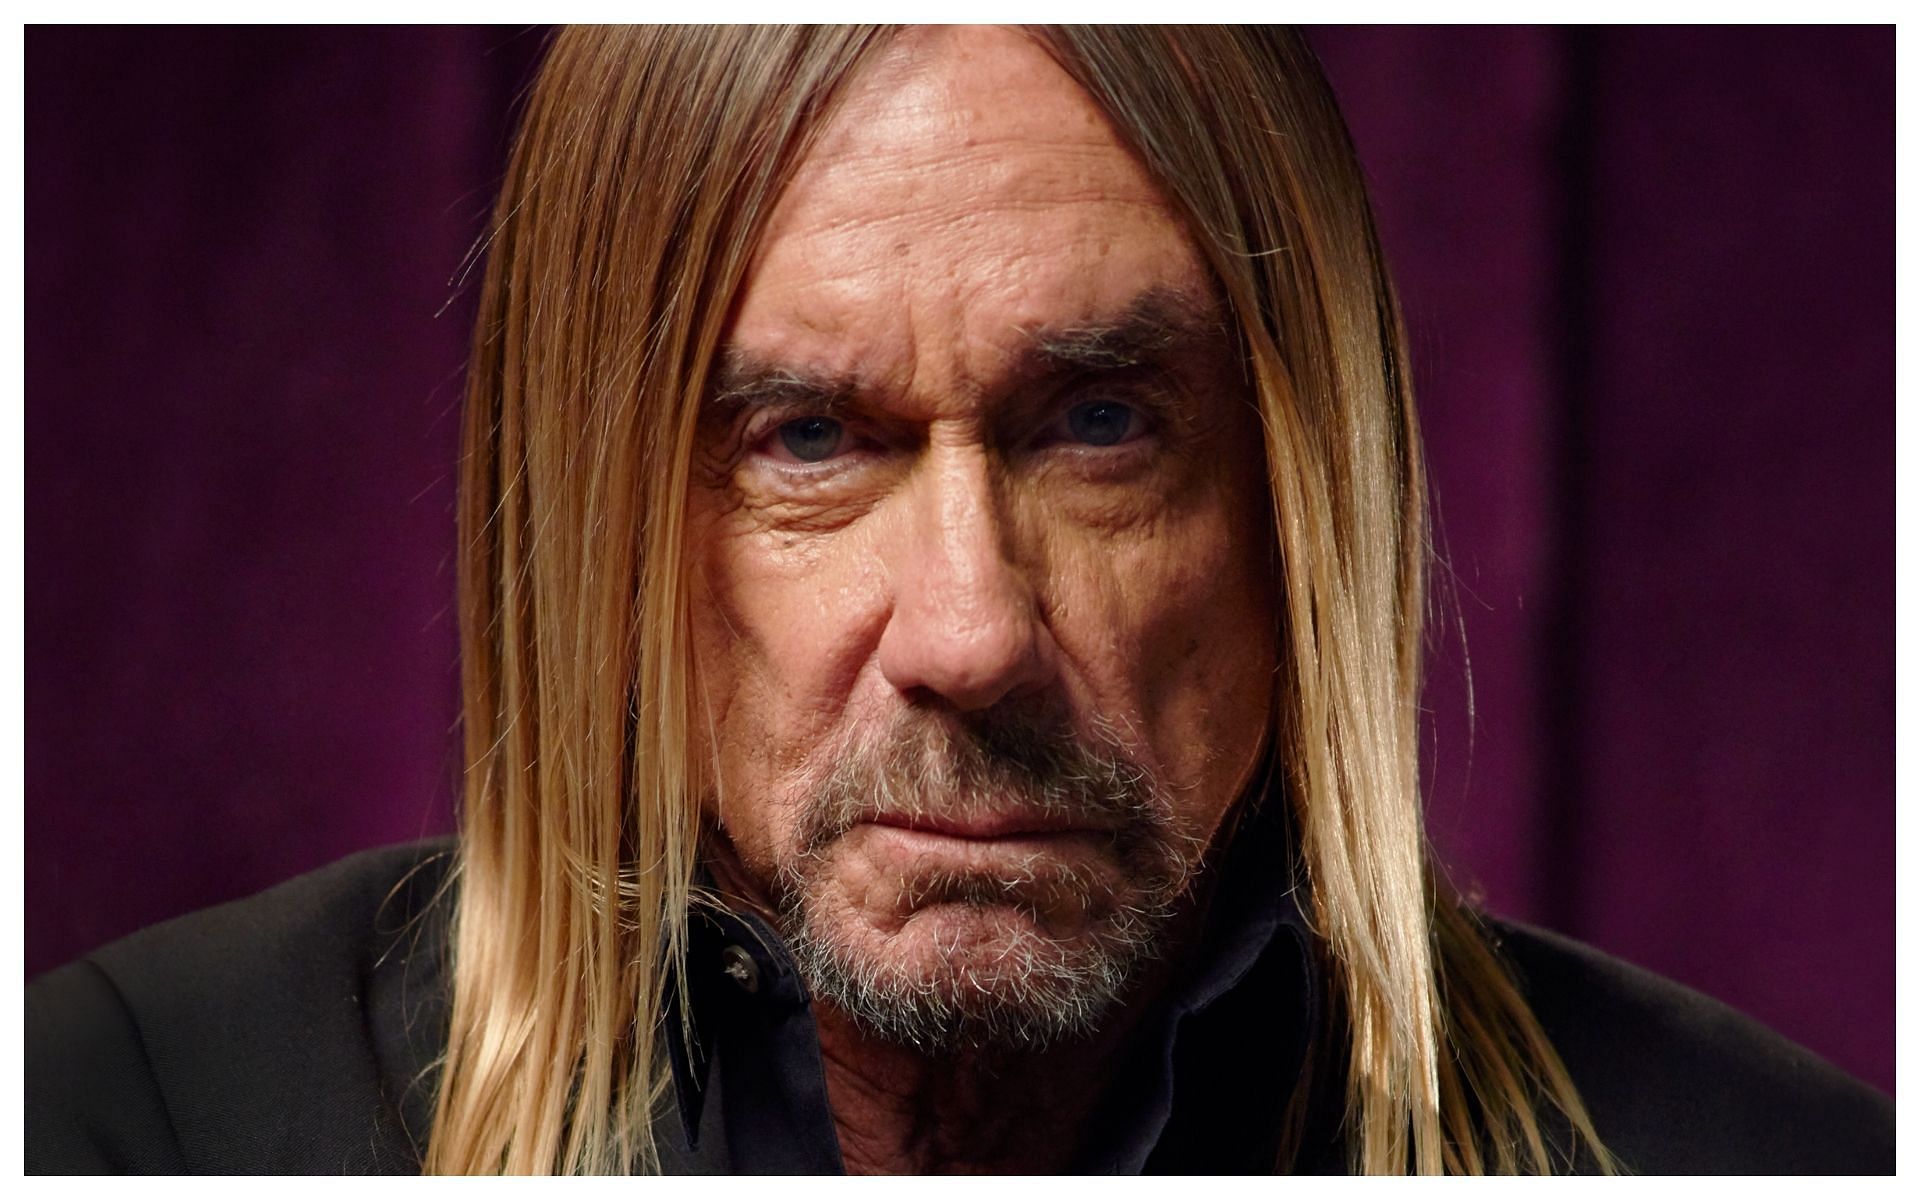 Rock and Roll legend Iggy pop in GTA San Andreas (Image via Rolling Stone)